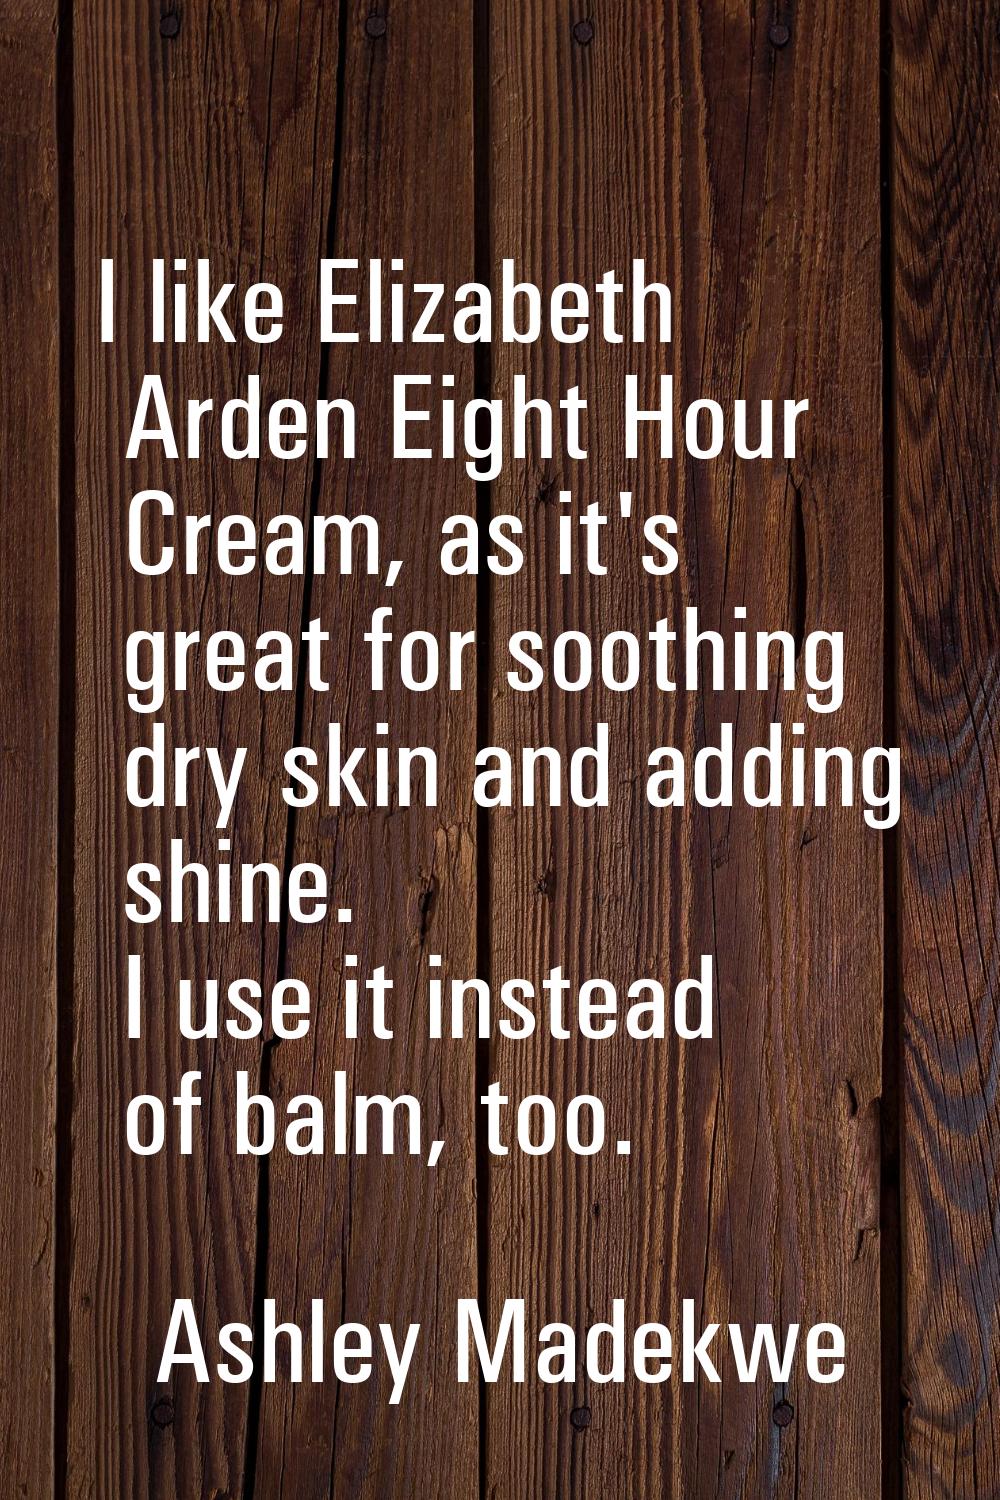 I like Elizabeth Arden Eight Hour Cream, as it's great for soothing dry skin and adding shine. I us